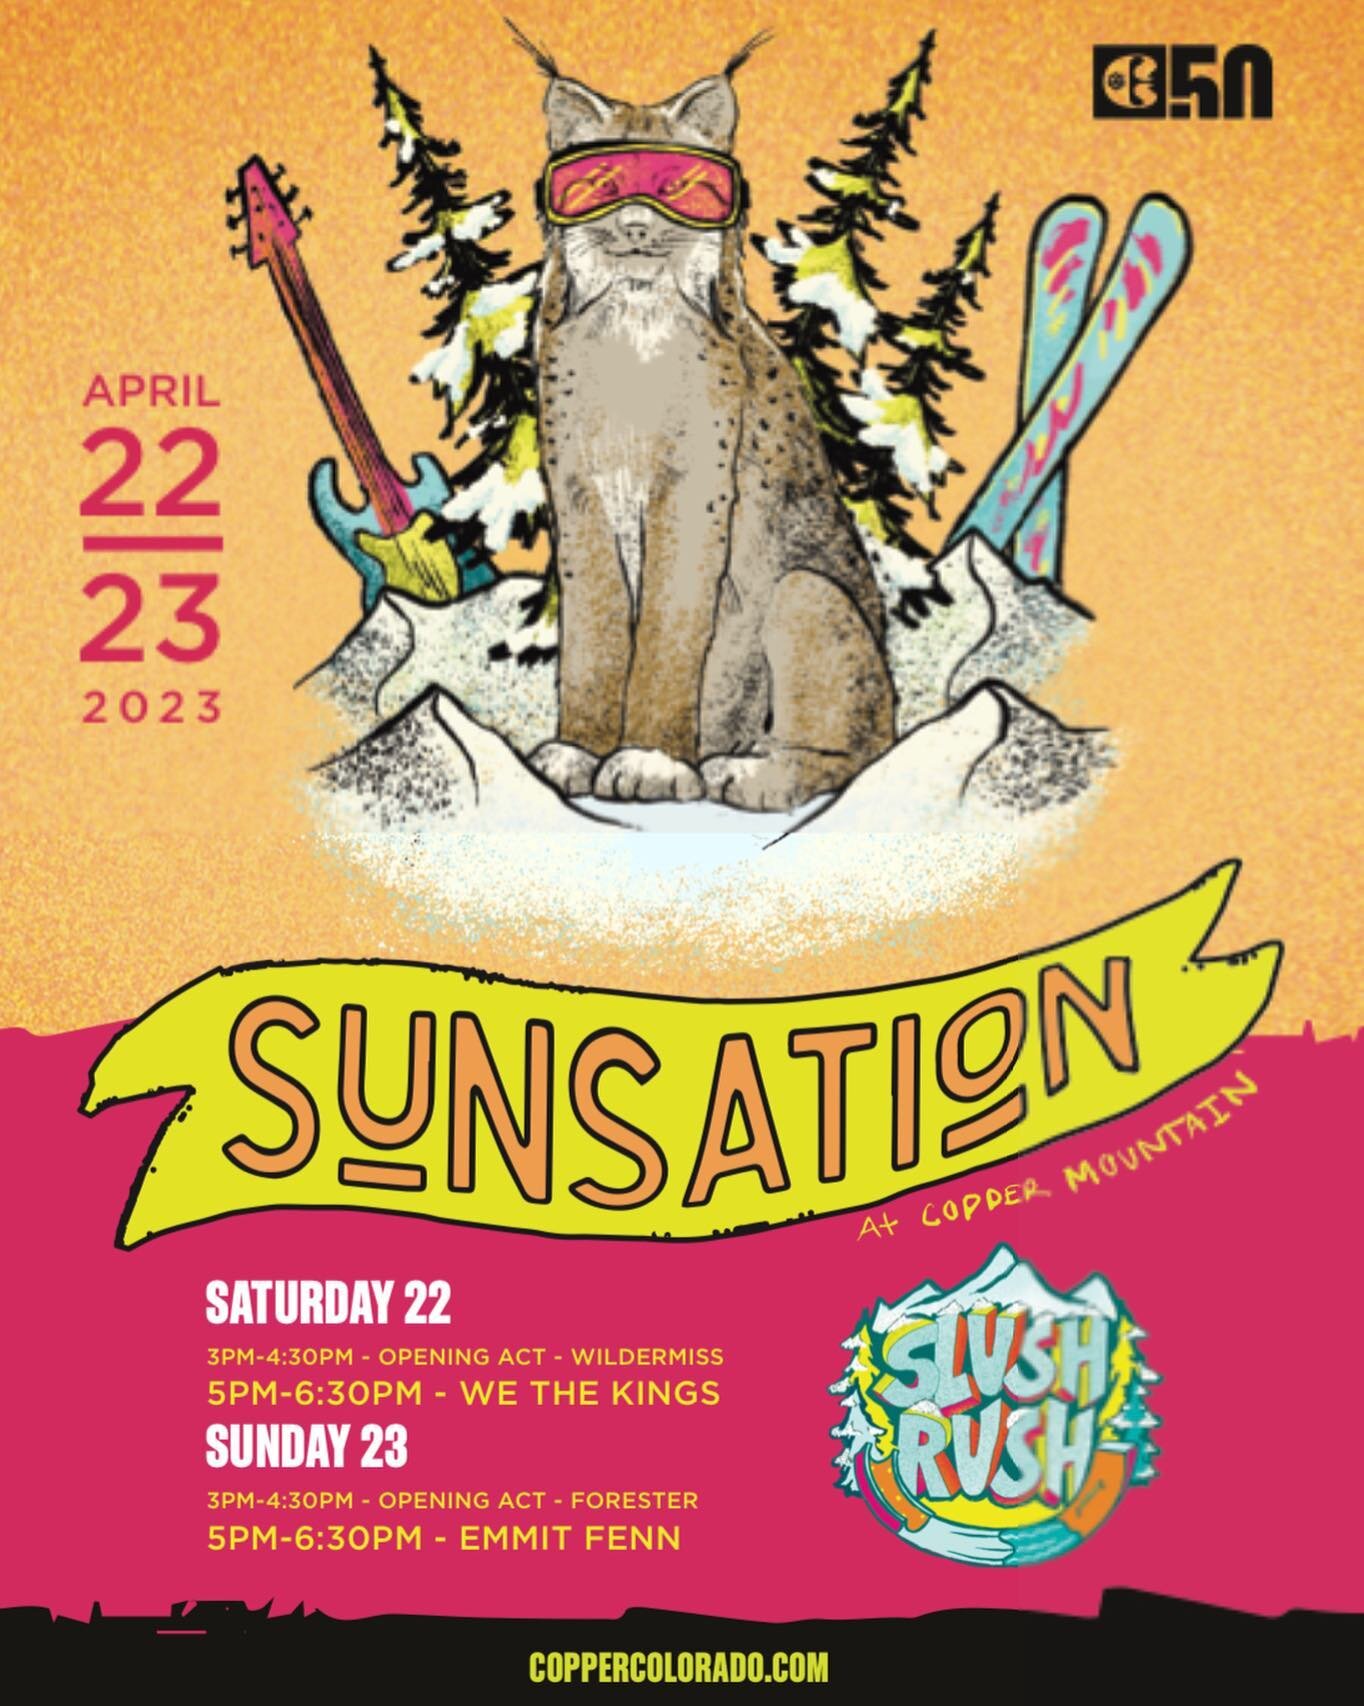 Wildermiss will be at Sunsation this spring!